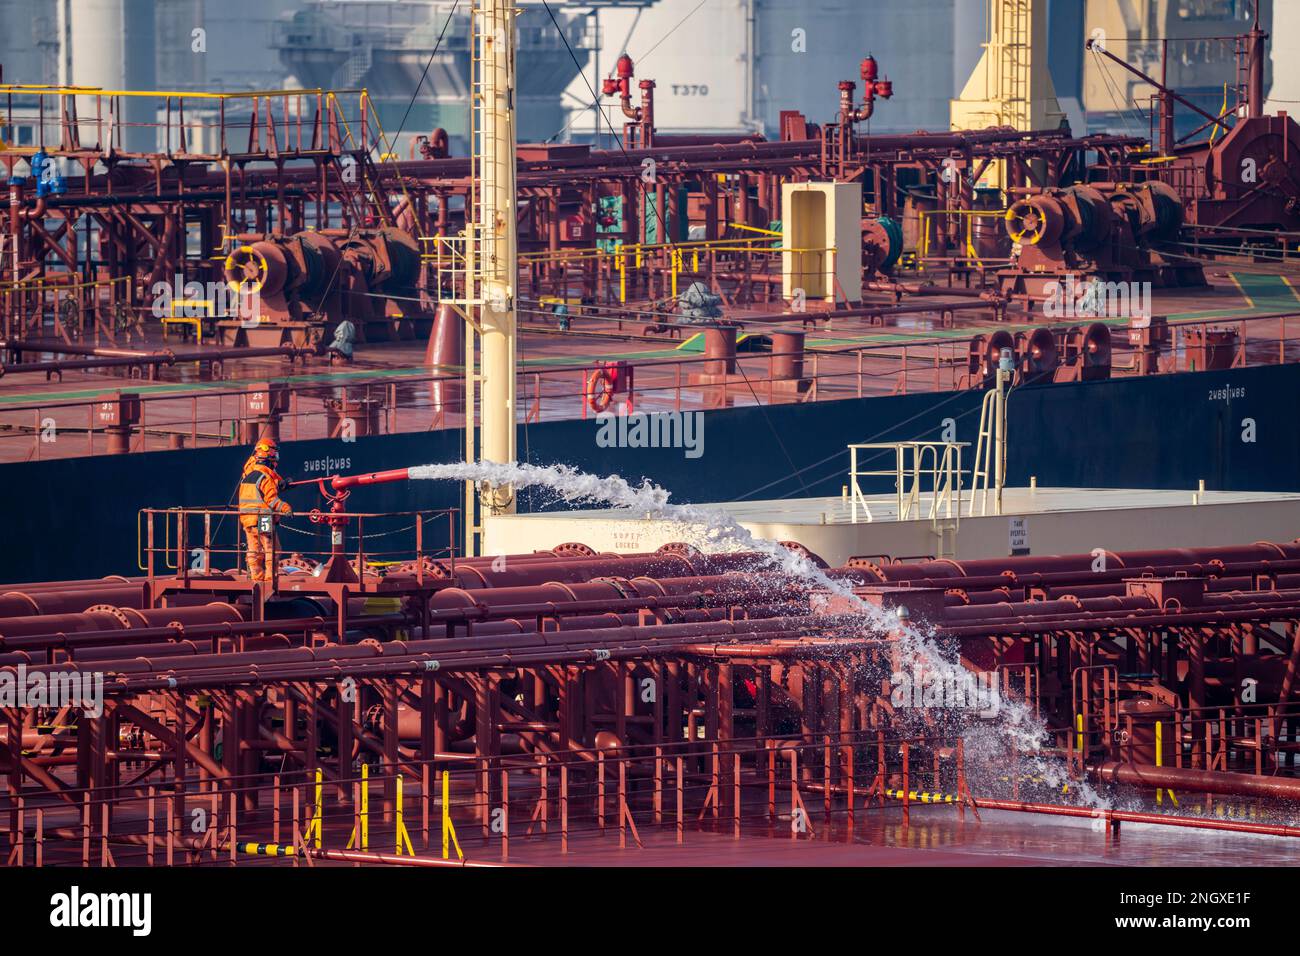 The crude oil tanker HOJO, in the seaport of Rotterdam, in the Petroleumhaven, Europoort, ship's personnel checking the fire extinguishing equipment, Stock Photo